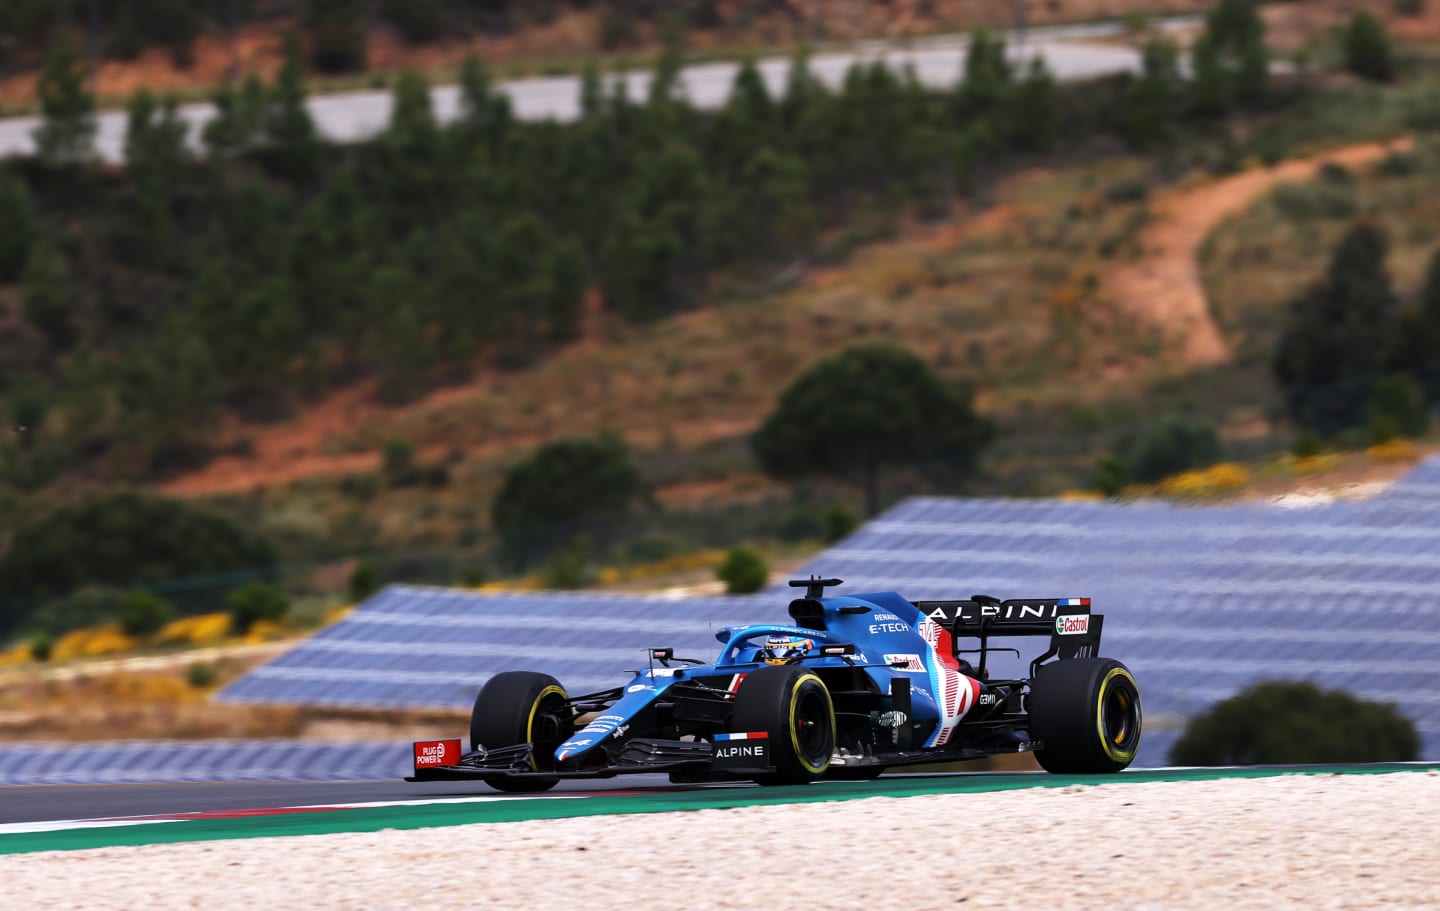 PORTIMAO, PORTUGAL - MAY 01: Fernando Alonso of Spain driving the (14) Alpine A521 Renault on track